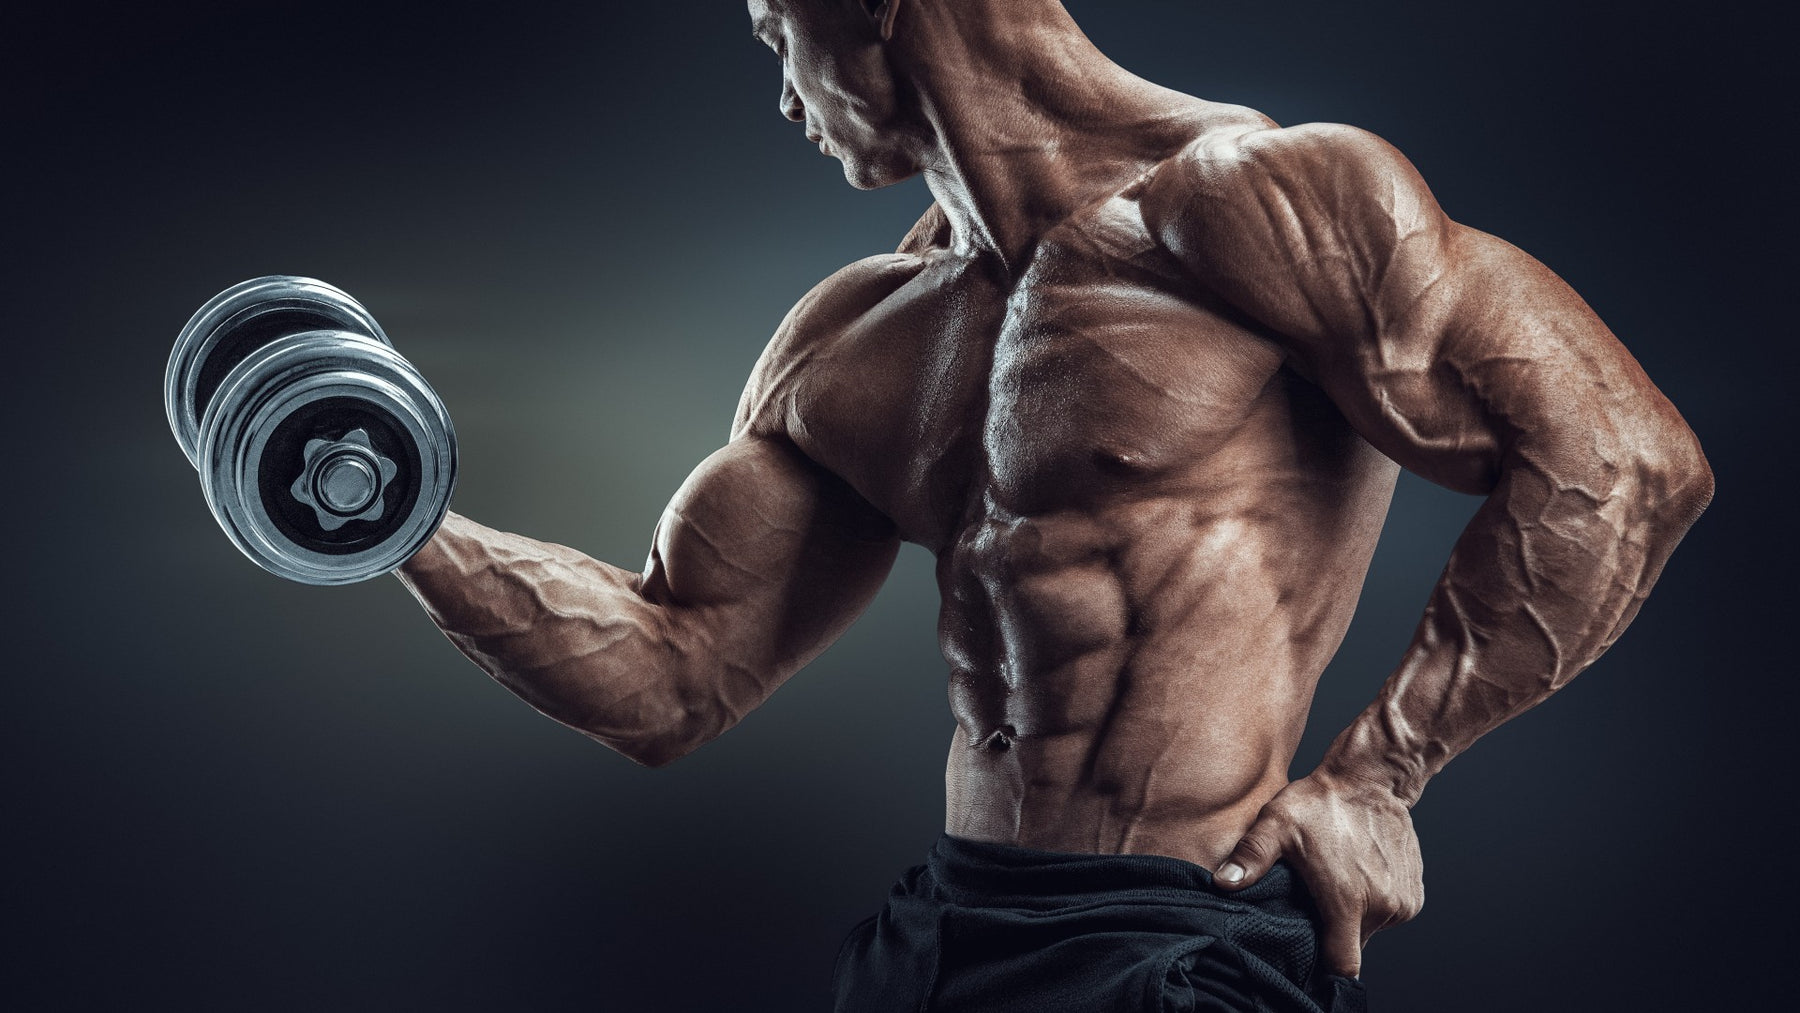 Nitrates: The Freaky-Intense King of Muscle Pumps?